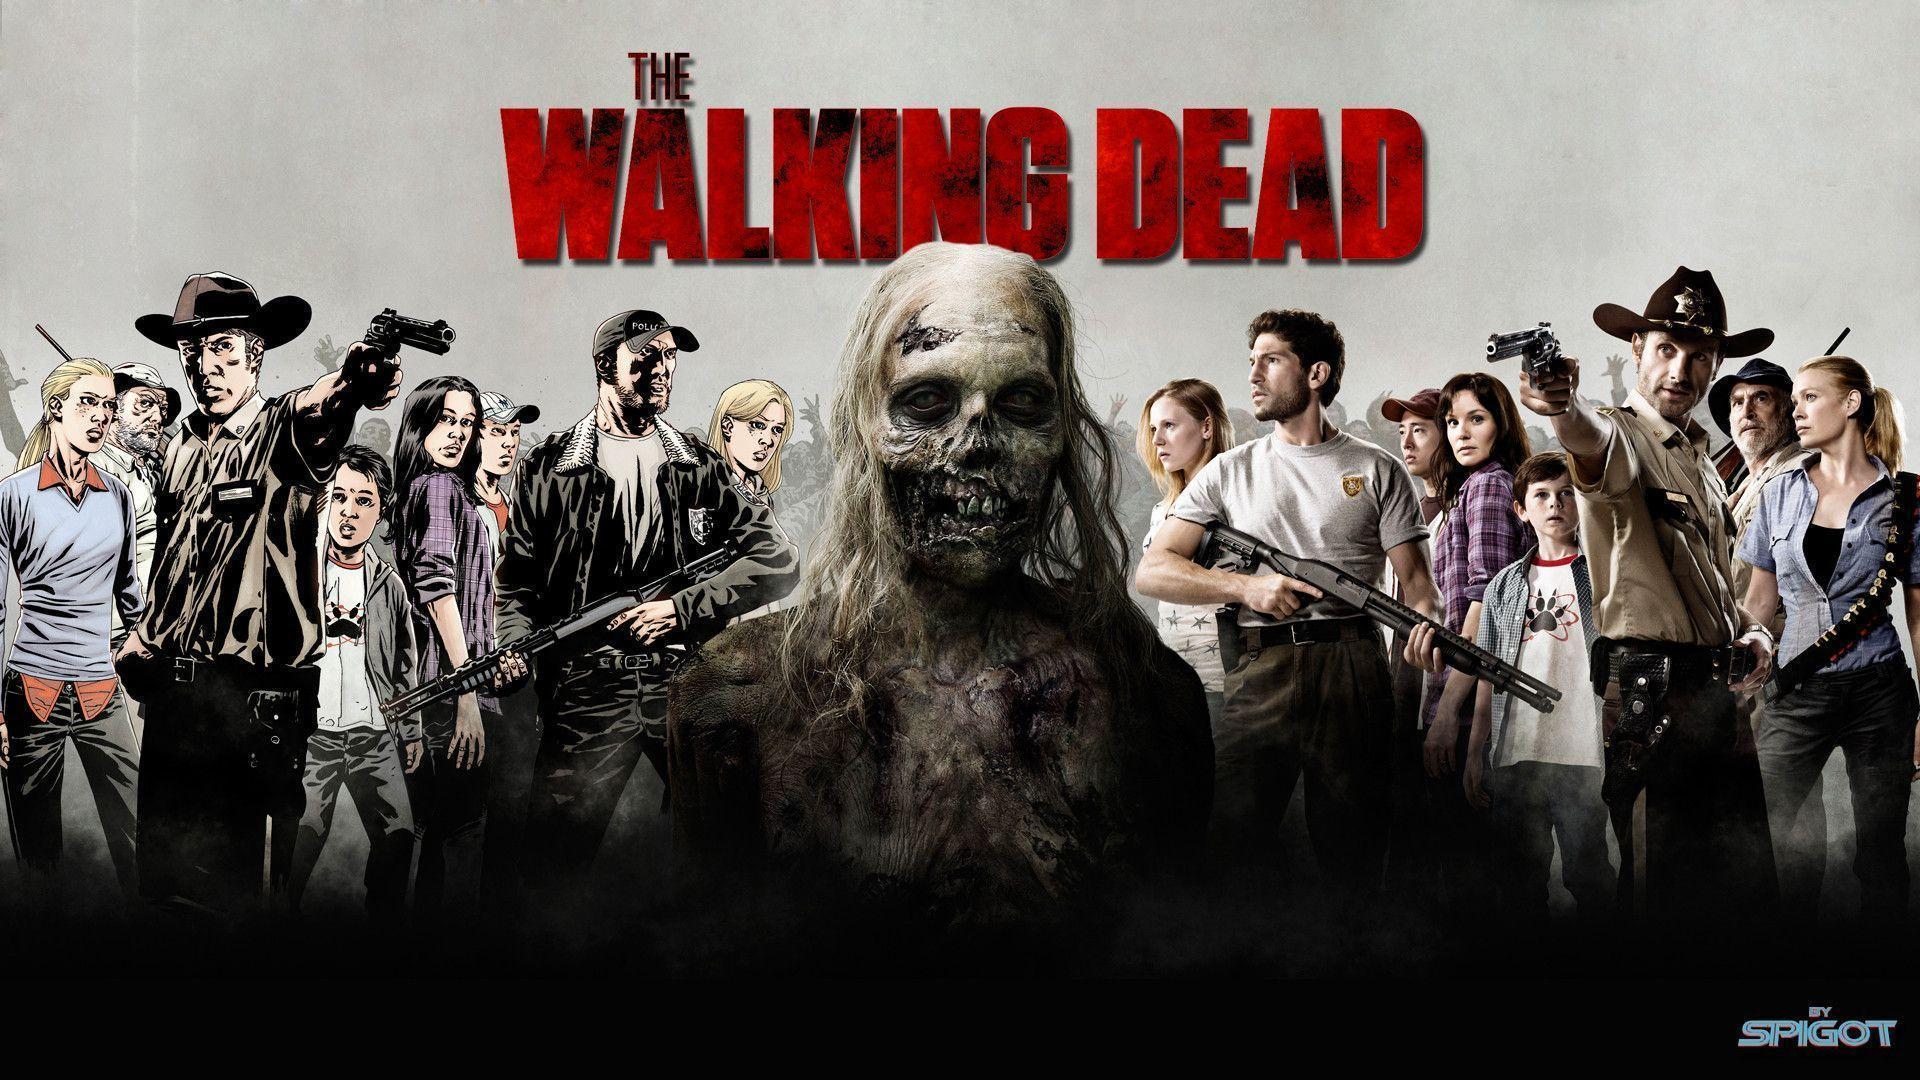 The Walking Dead Wallpapers Hd Picture Image Photo 61979 Label